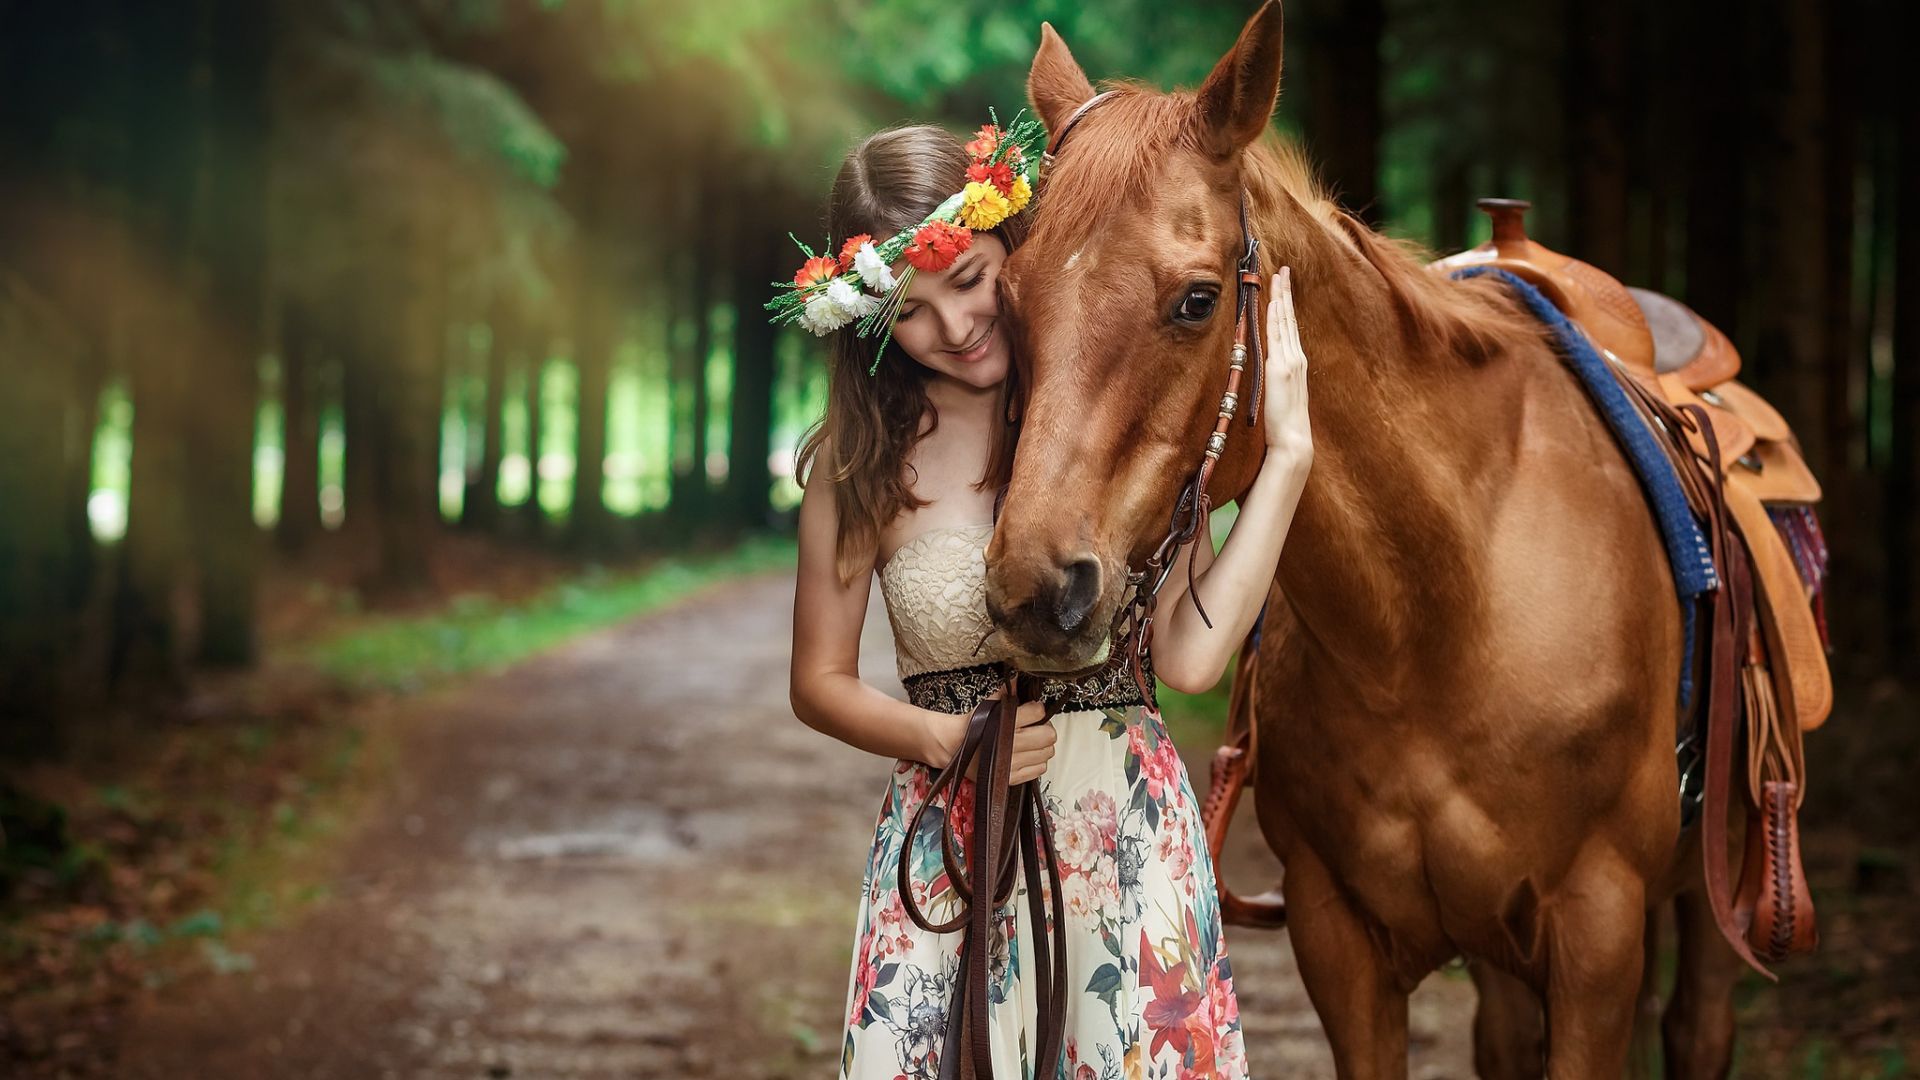 Wallpaper Woman and horse, outdoor